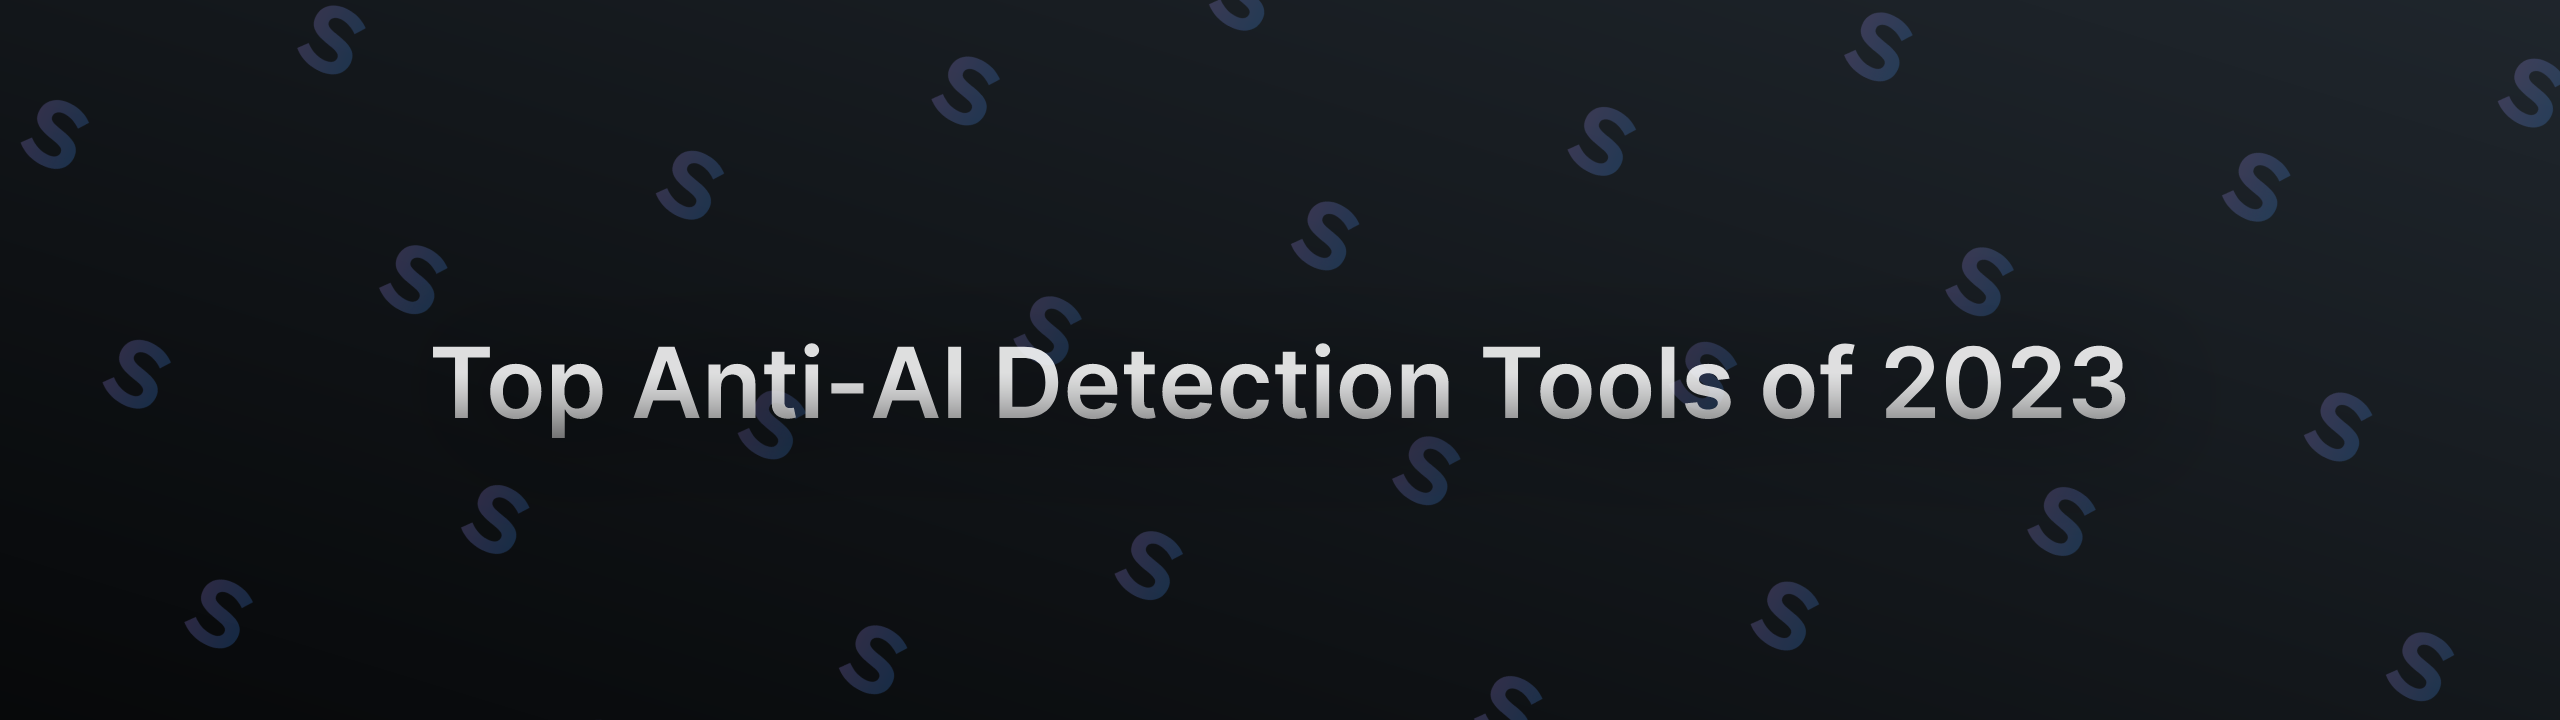 Top Anti-AI Detection Tools of 2023